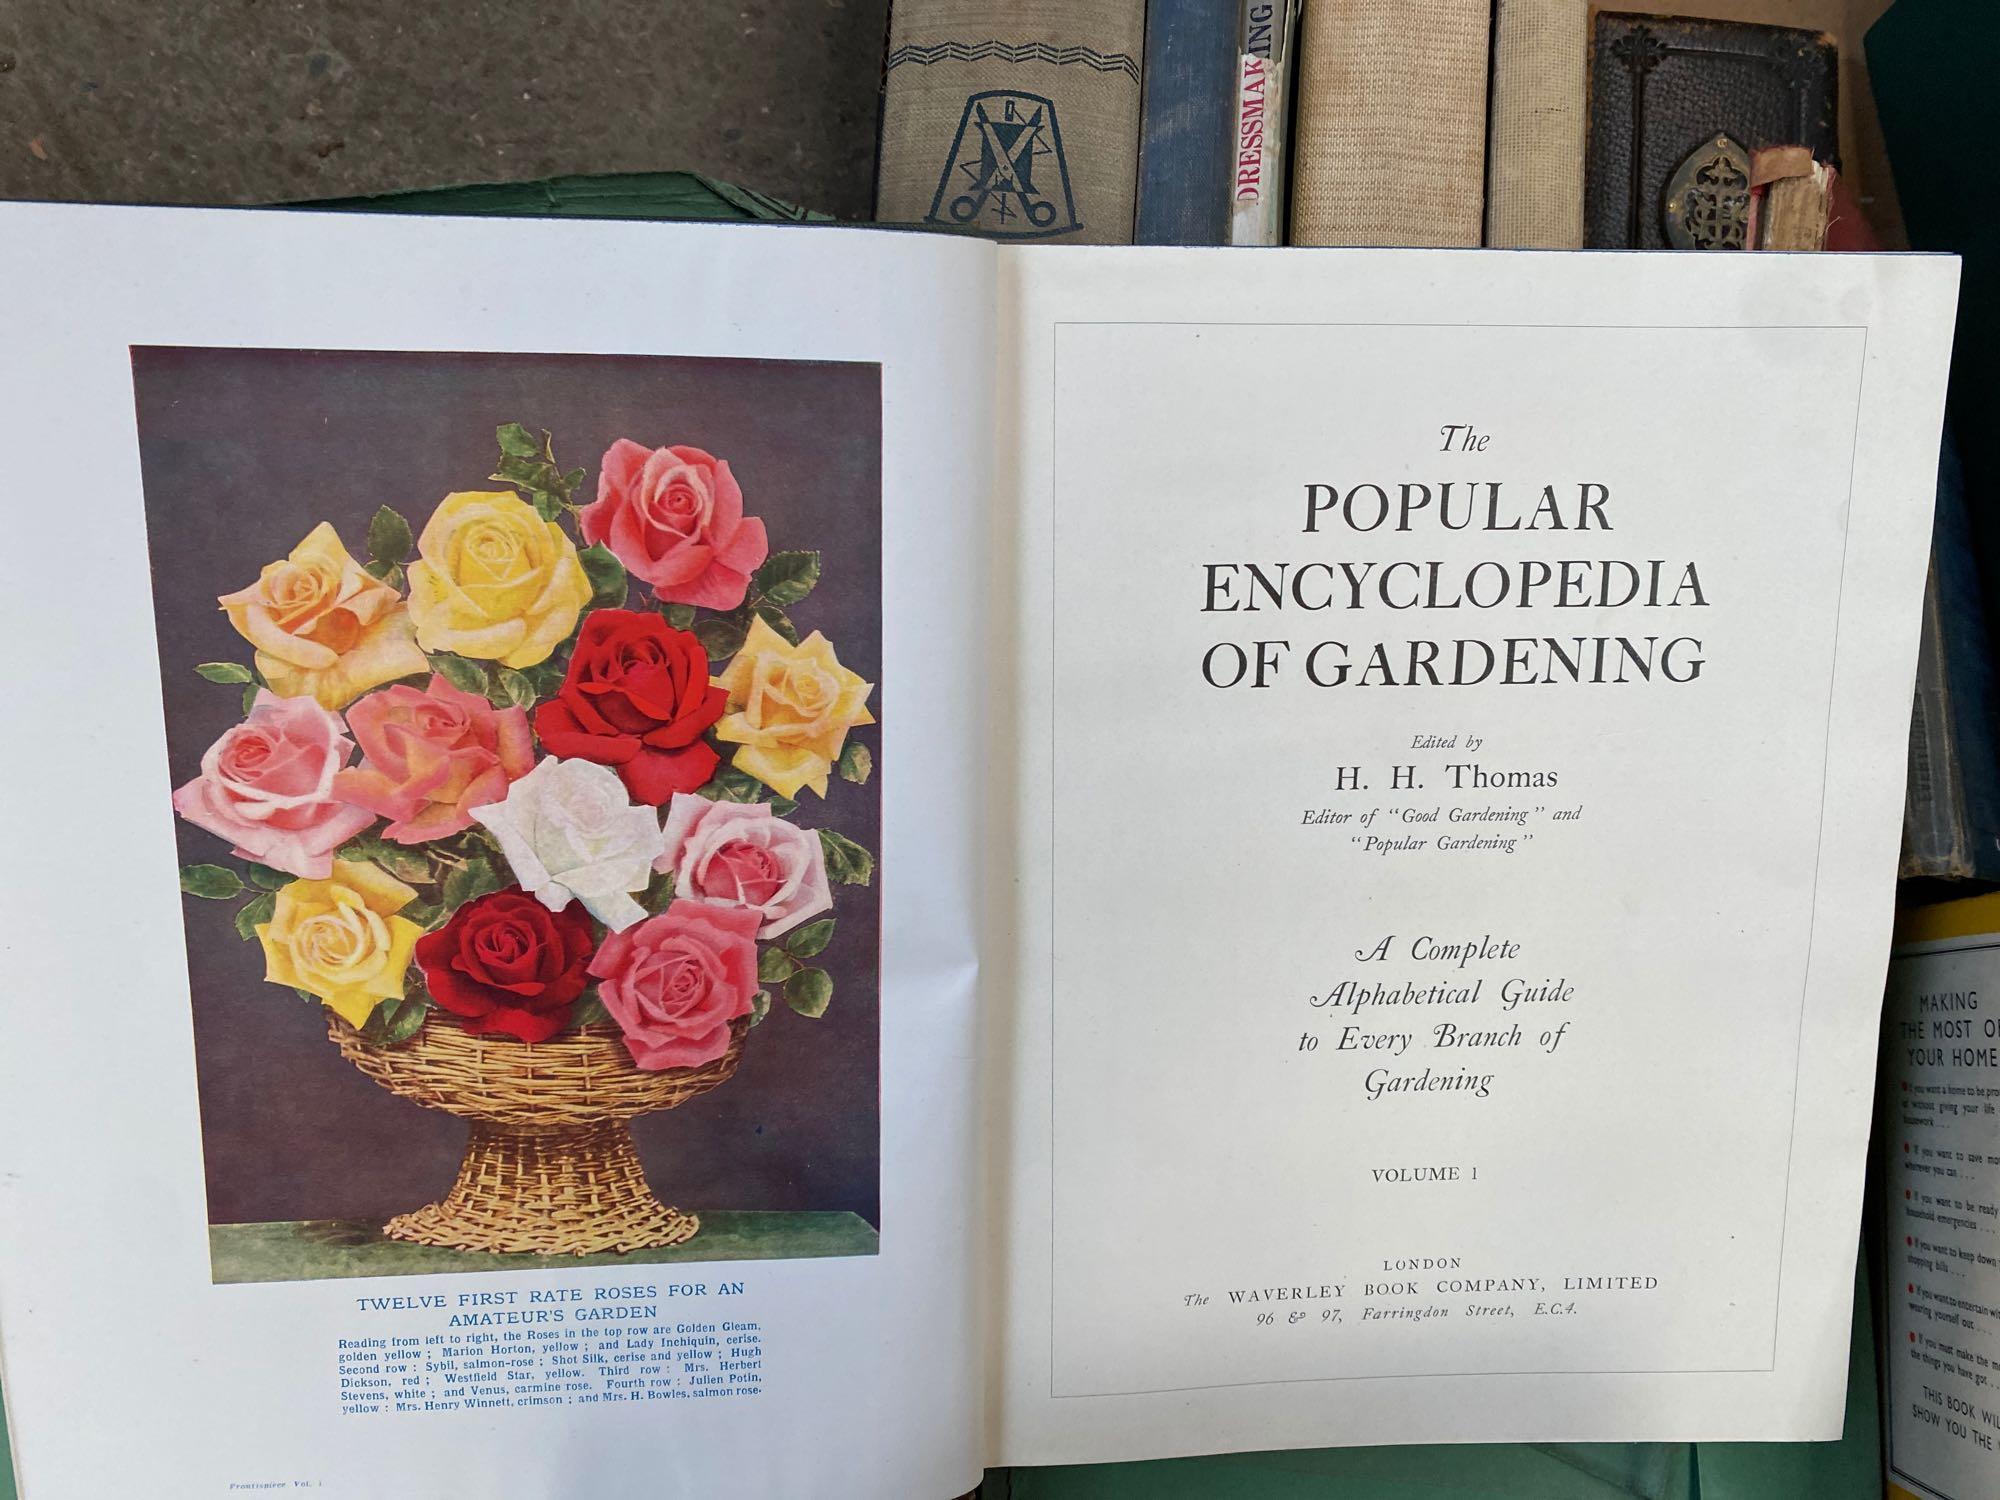 The Popular Encyclopedia of Gardening and other books - Image 8 of 11